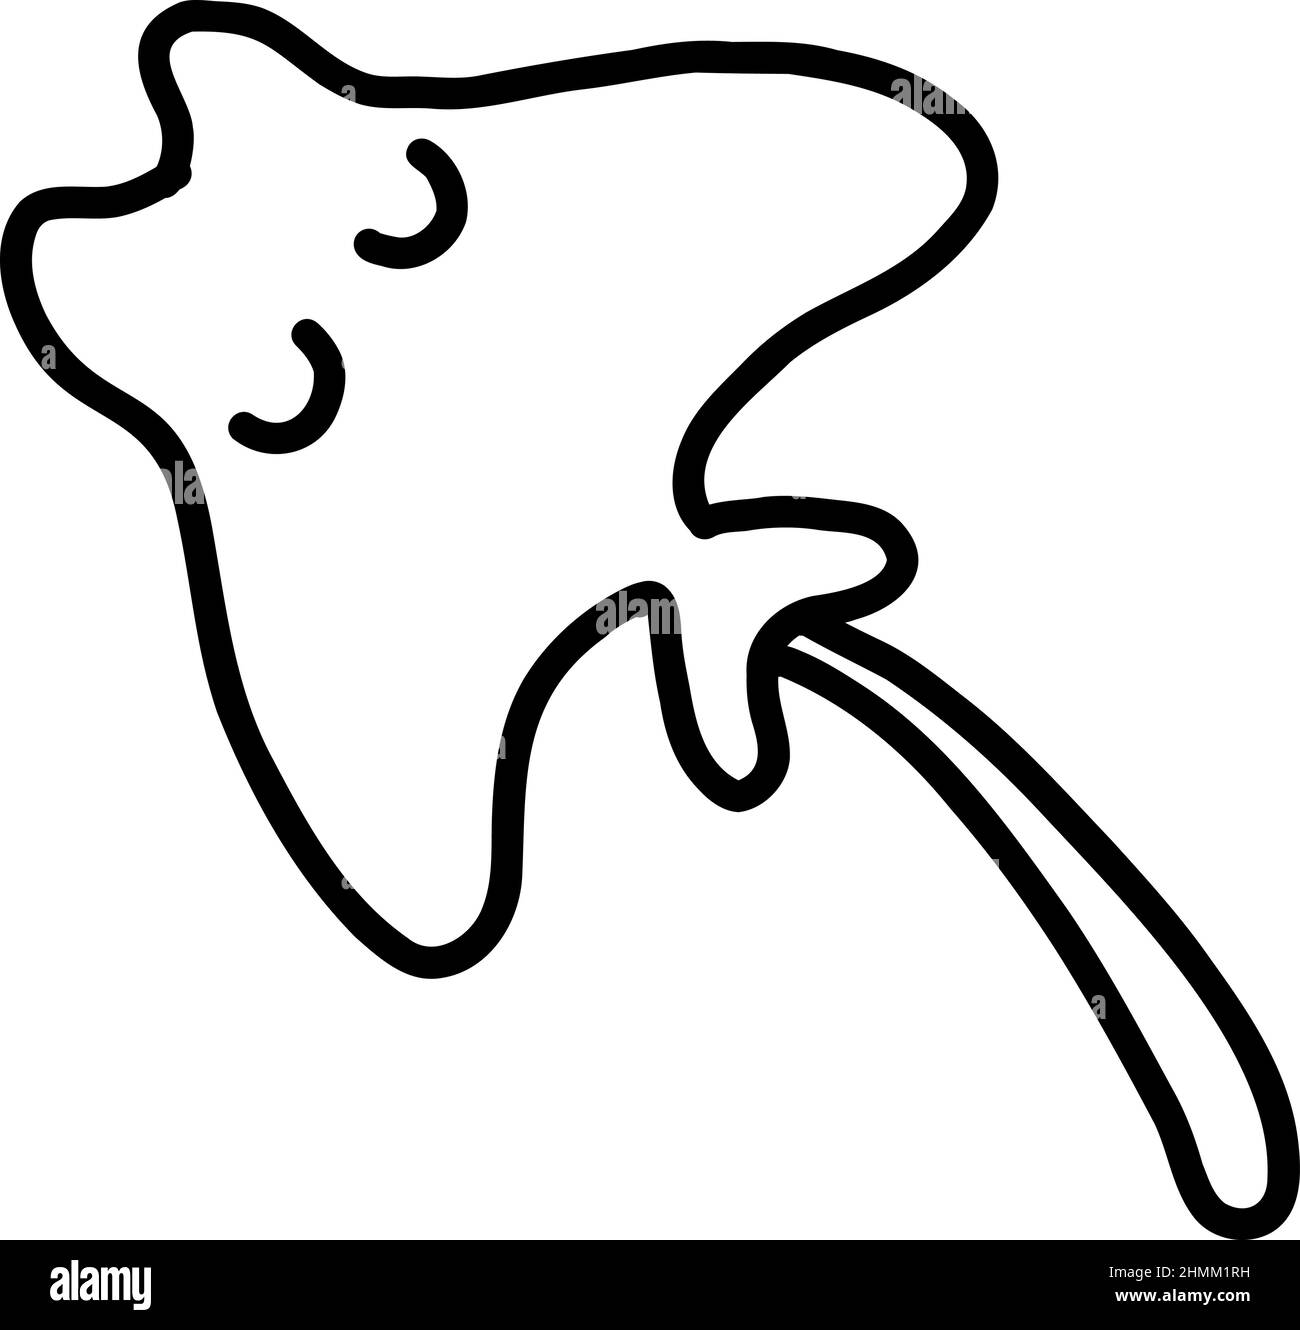 Sea stingray.Vector illustration in the style of a doodle. Cramp-fish sketch Stock Vector